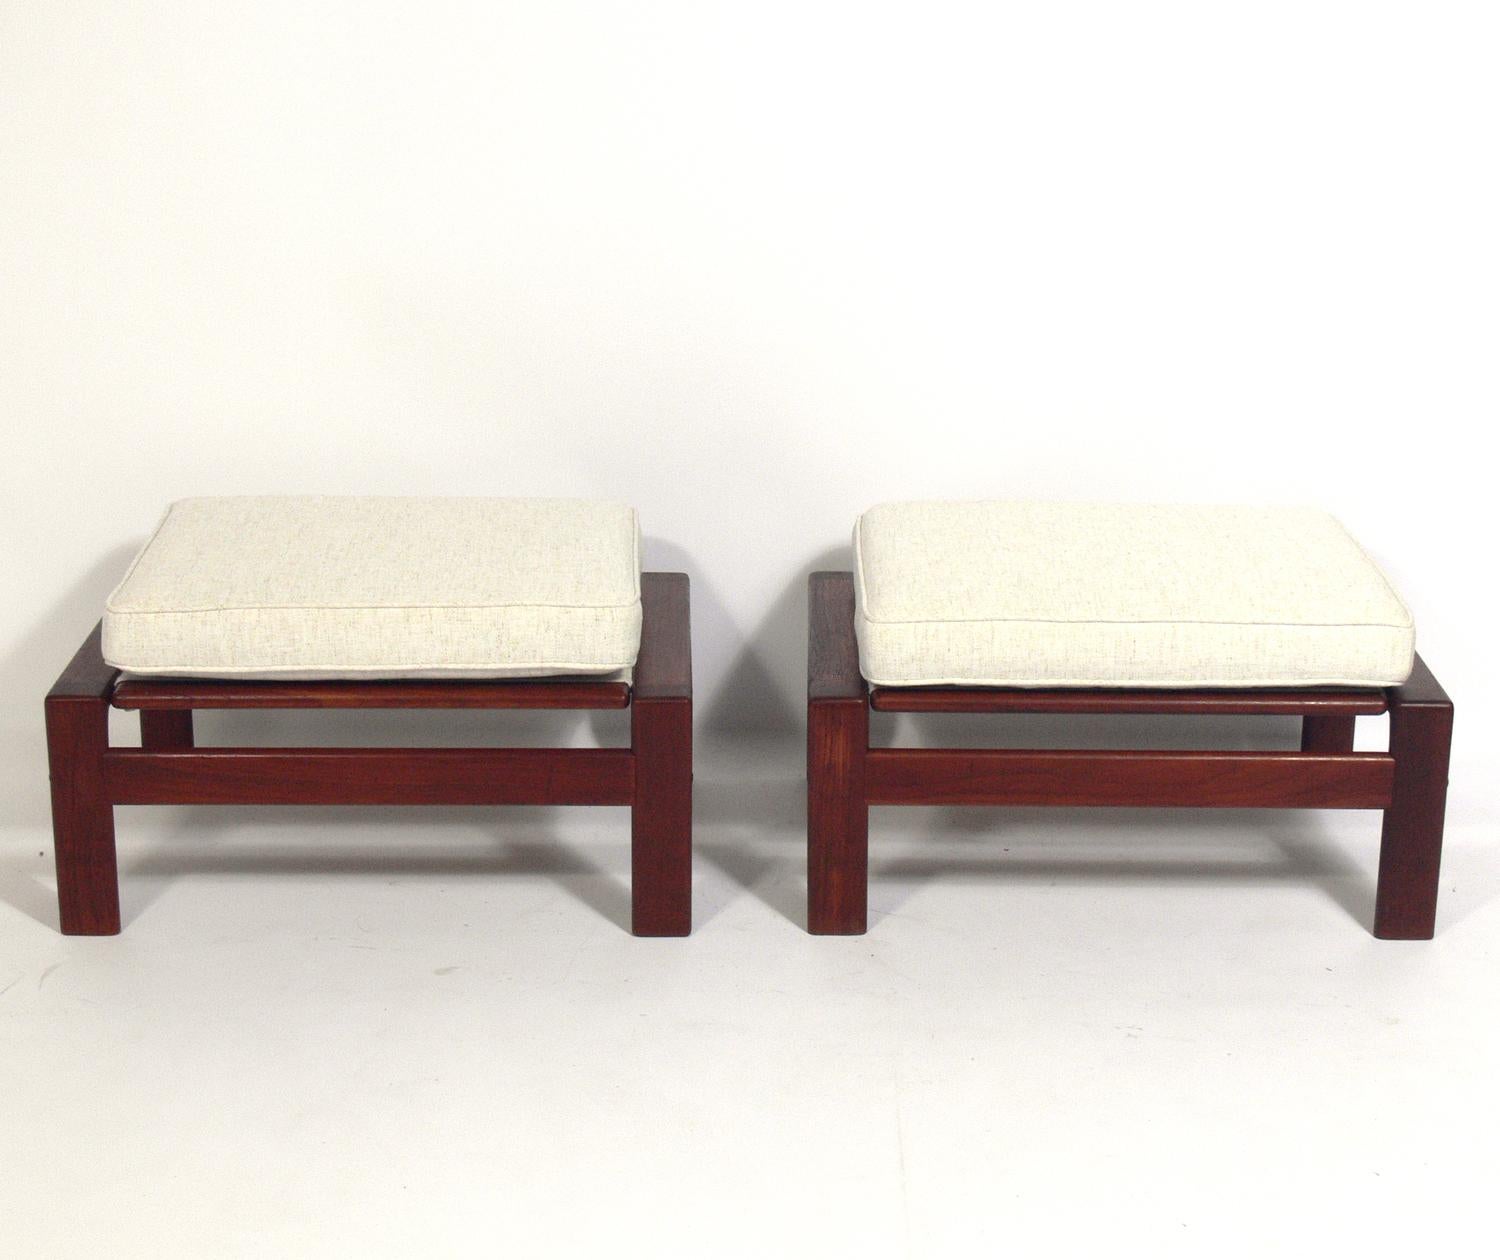 Danish modern teak stools or ottomans, made by Komfort, Denmark, circa 1960s. They have been recently reupholstered in an ivory herringbone fabric. The teak frames have been cleaned and Danish oiled.